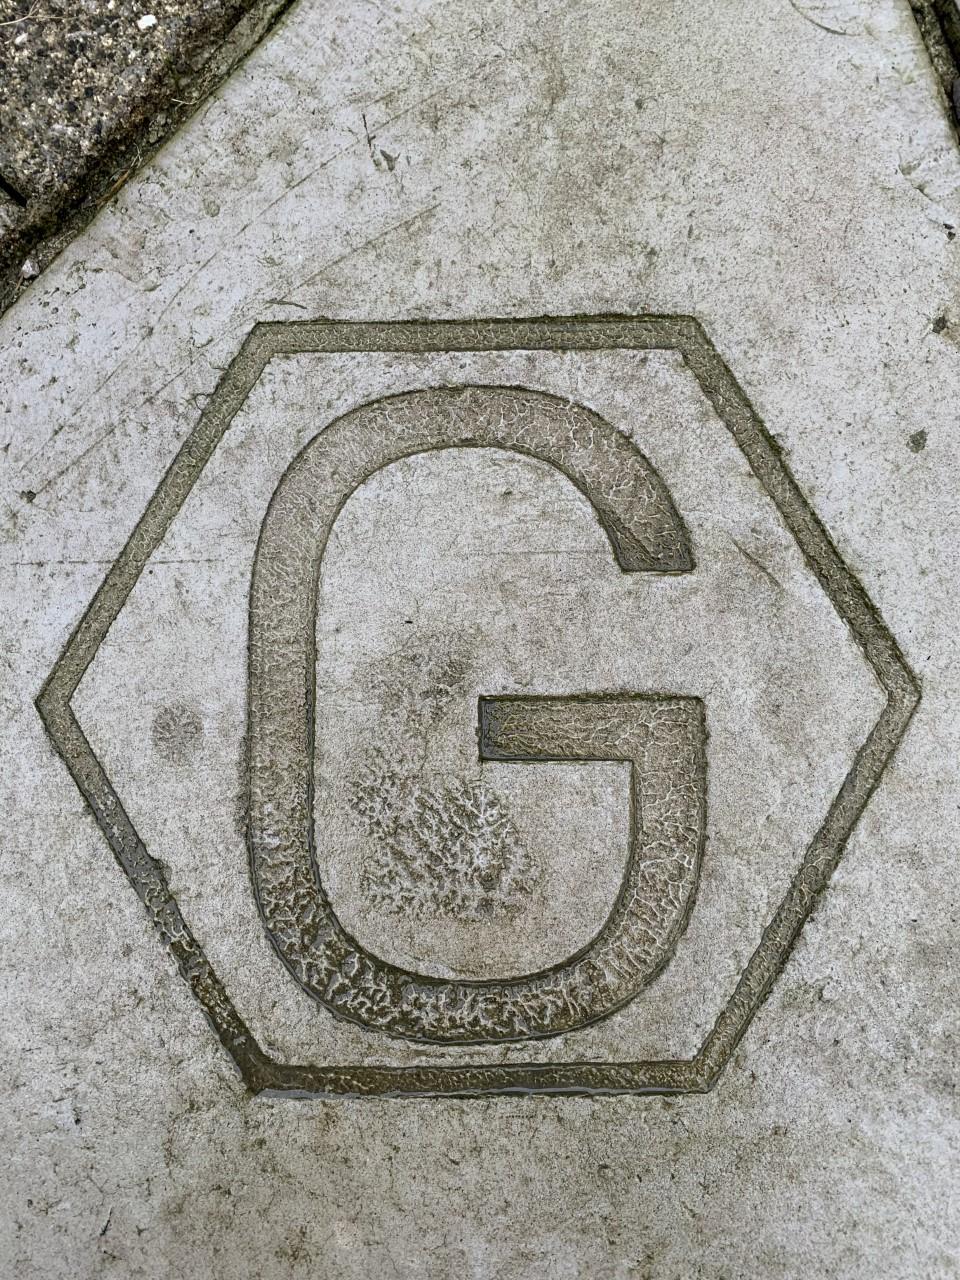 <p>Figure 6 'G' Graphene symbol stamped into concretene; photo taken by the author, 31 December 2022</p>